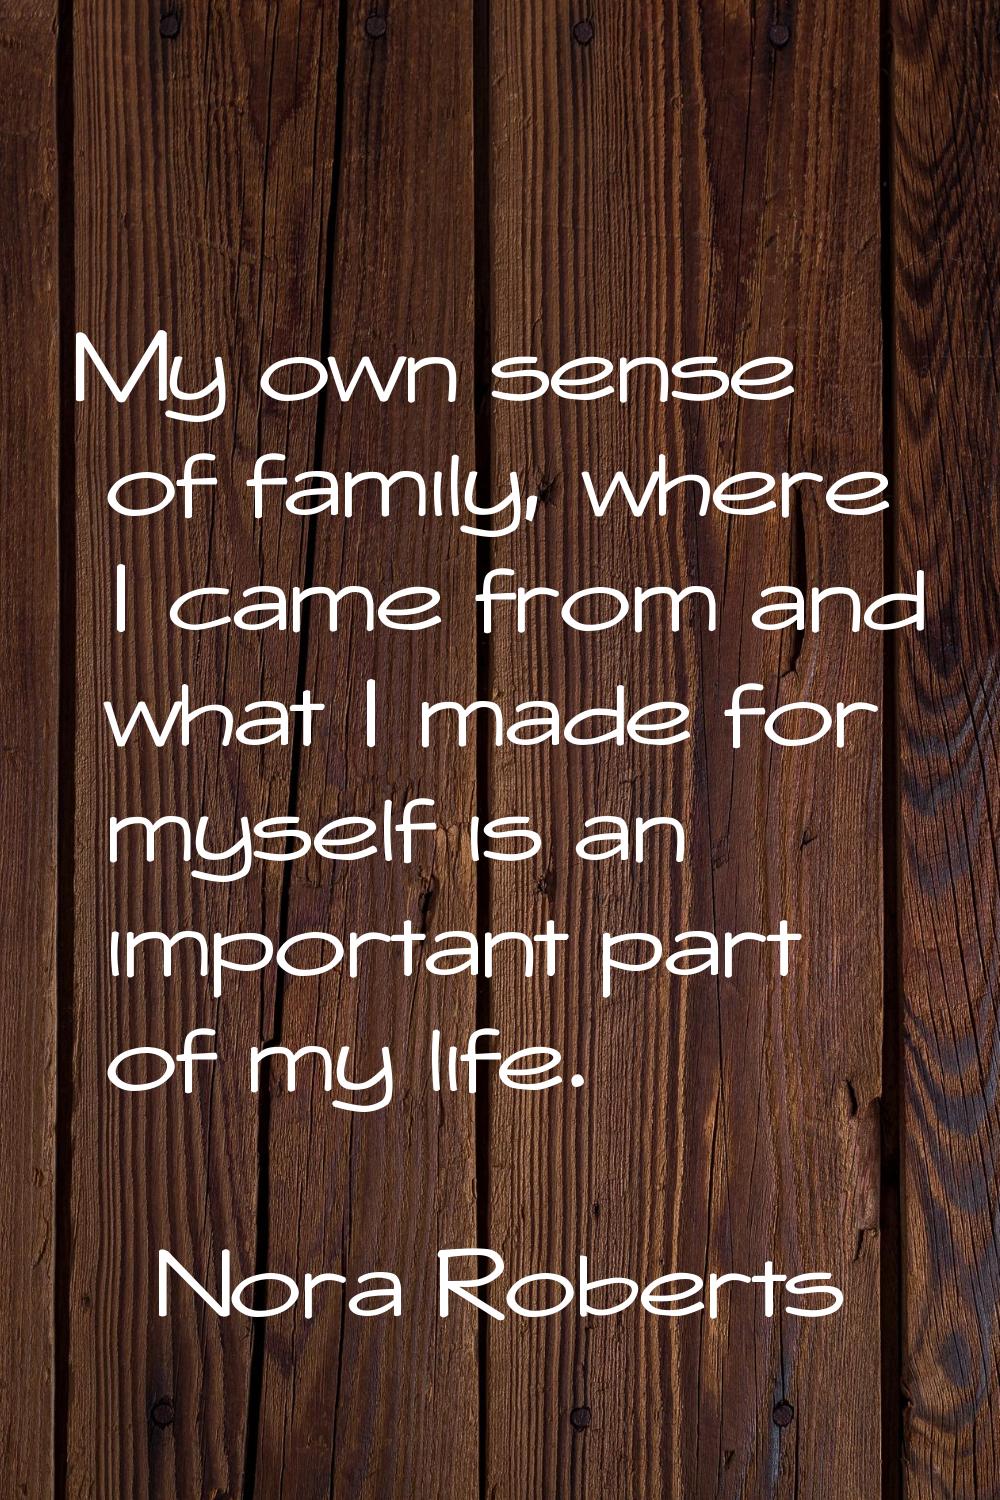 My own sense of family, where I came from and what I made for myself is an important part of my lif